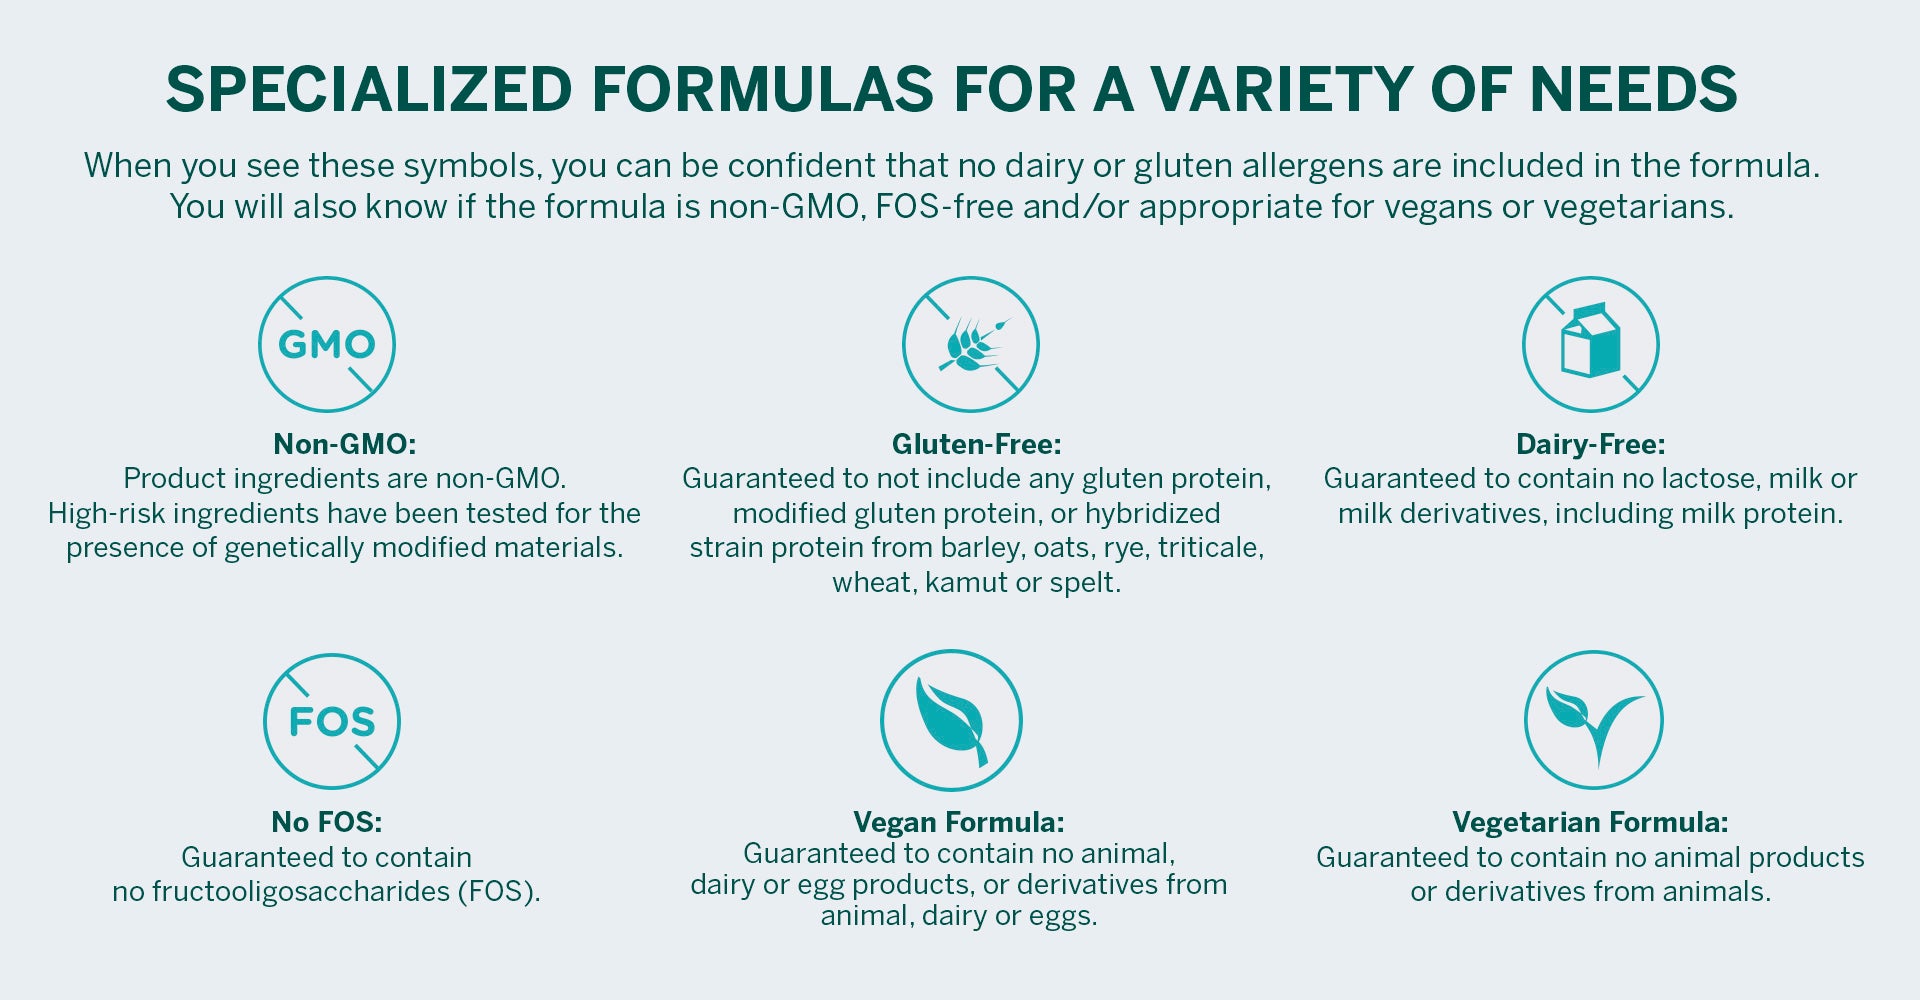 Table showing various symbols that can be found on Genestra packaging like Non-GMO, Gluten-Free, Dairy-Free, No FOS, Vegan Formula and Vegetarian Formula.